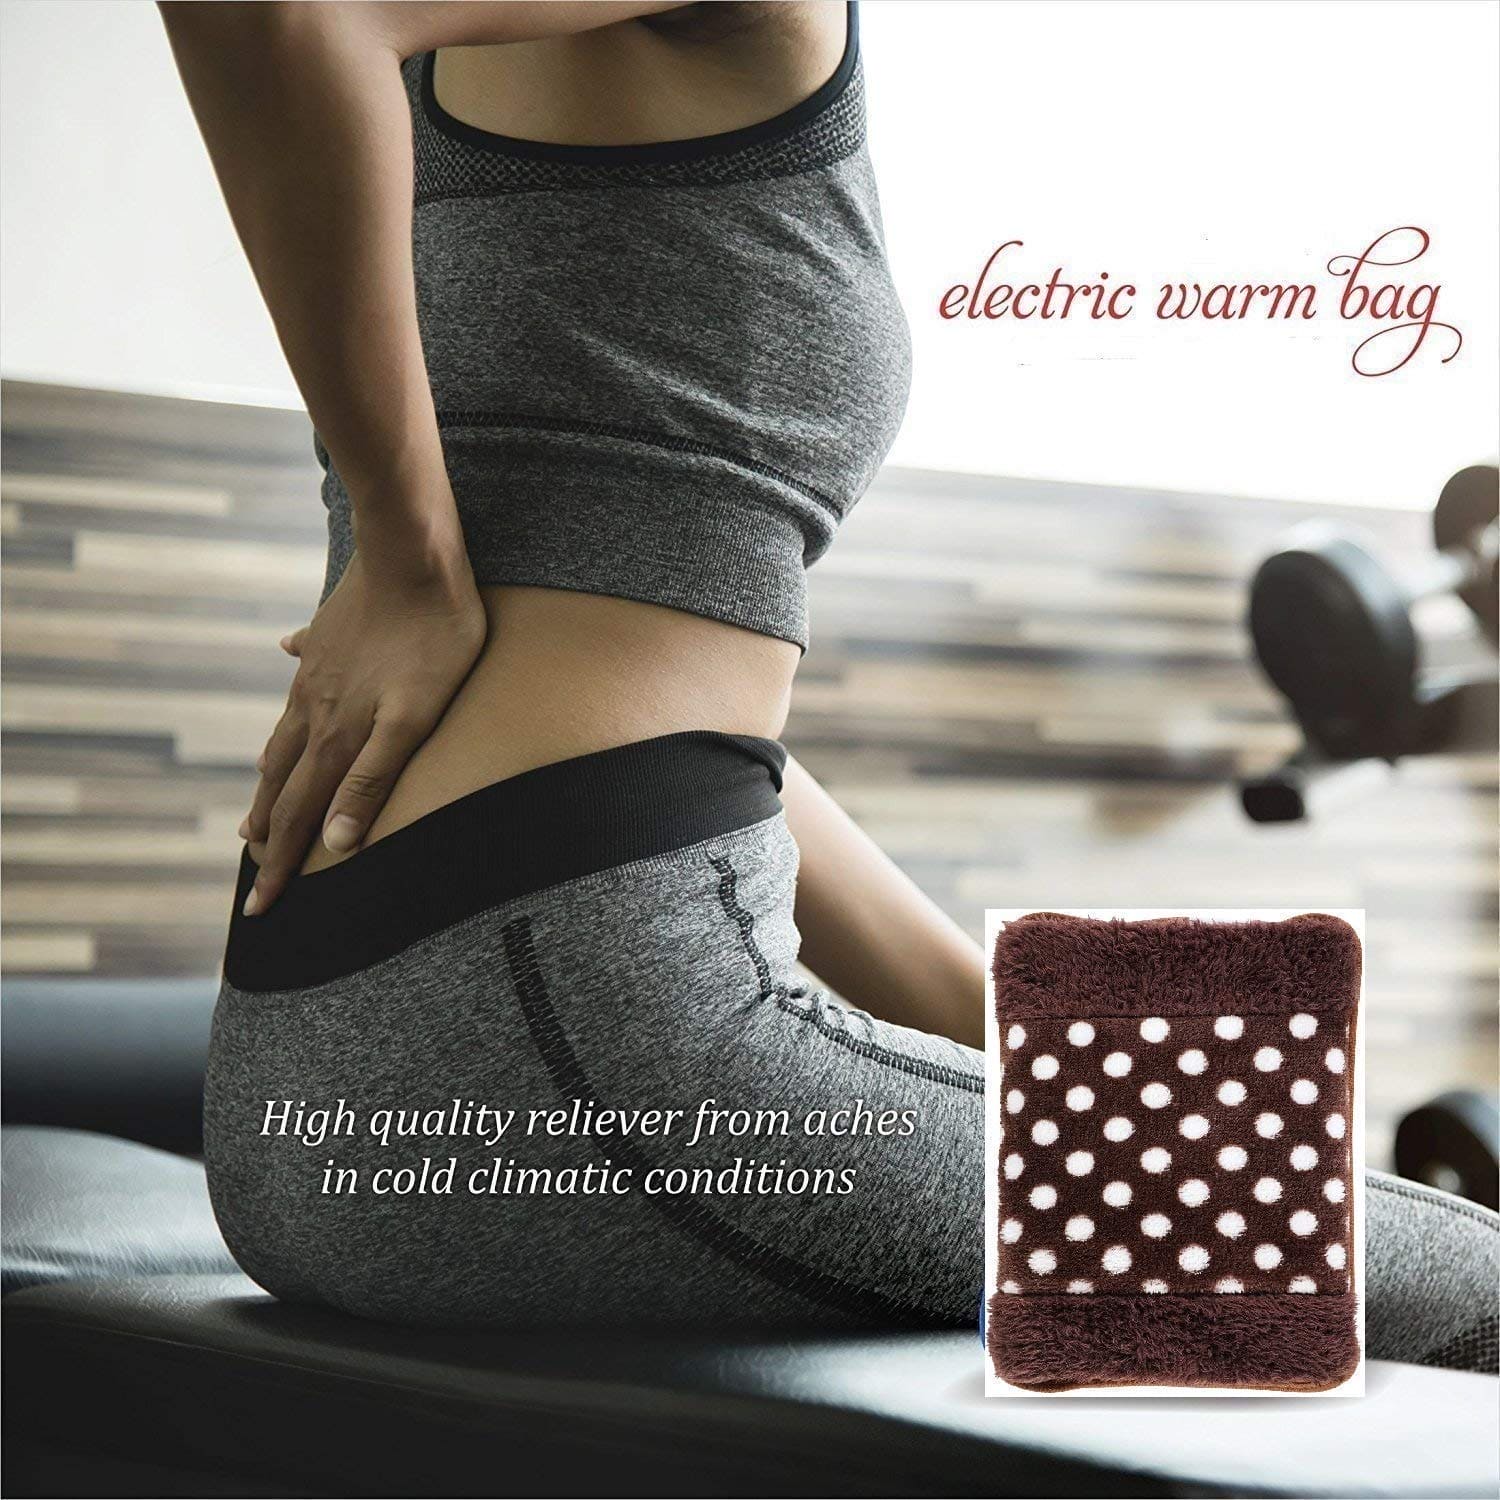 Electric Water Heating Bag, Soft Heating Pad, Rechargeable Hot Water Bag, Water Bag for Pain Relief Winter, Heating Gel Pad-Heat Pouch, Warm Water Bag, Fur Velvet Heating Pad With Hand Pocket